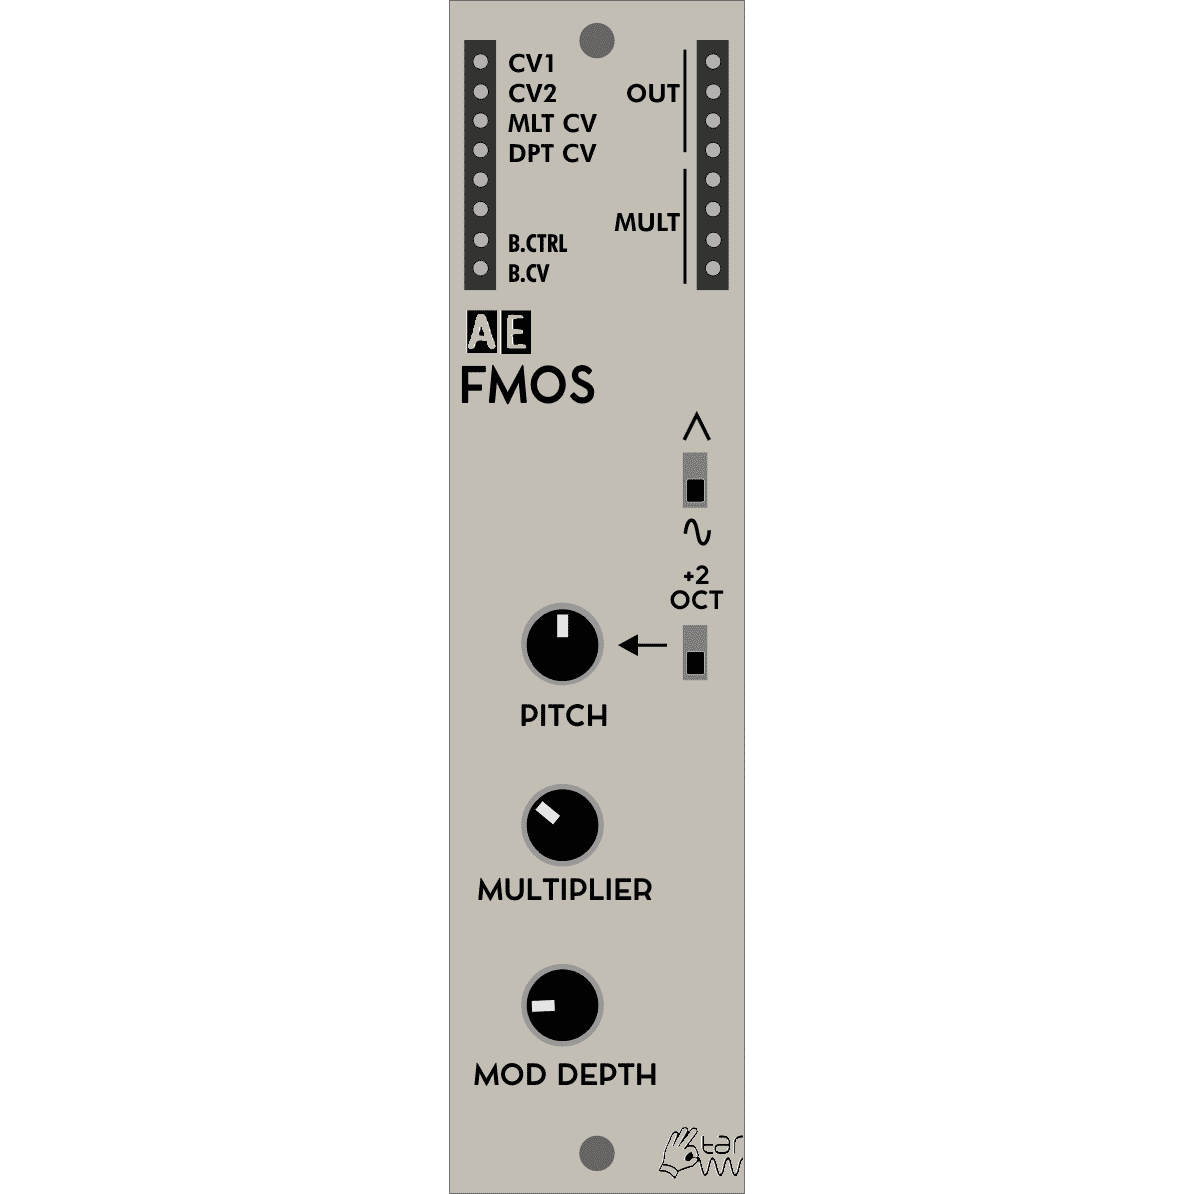 FMOS Module FM synthesis for the AE Modular